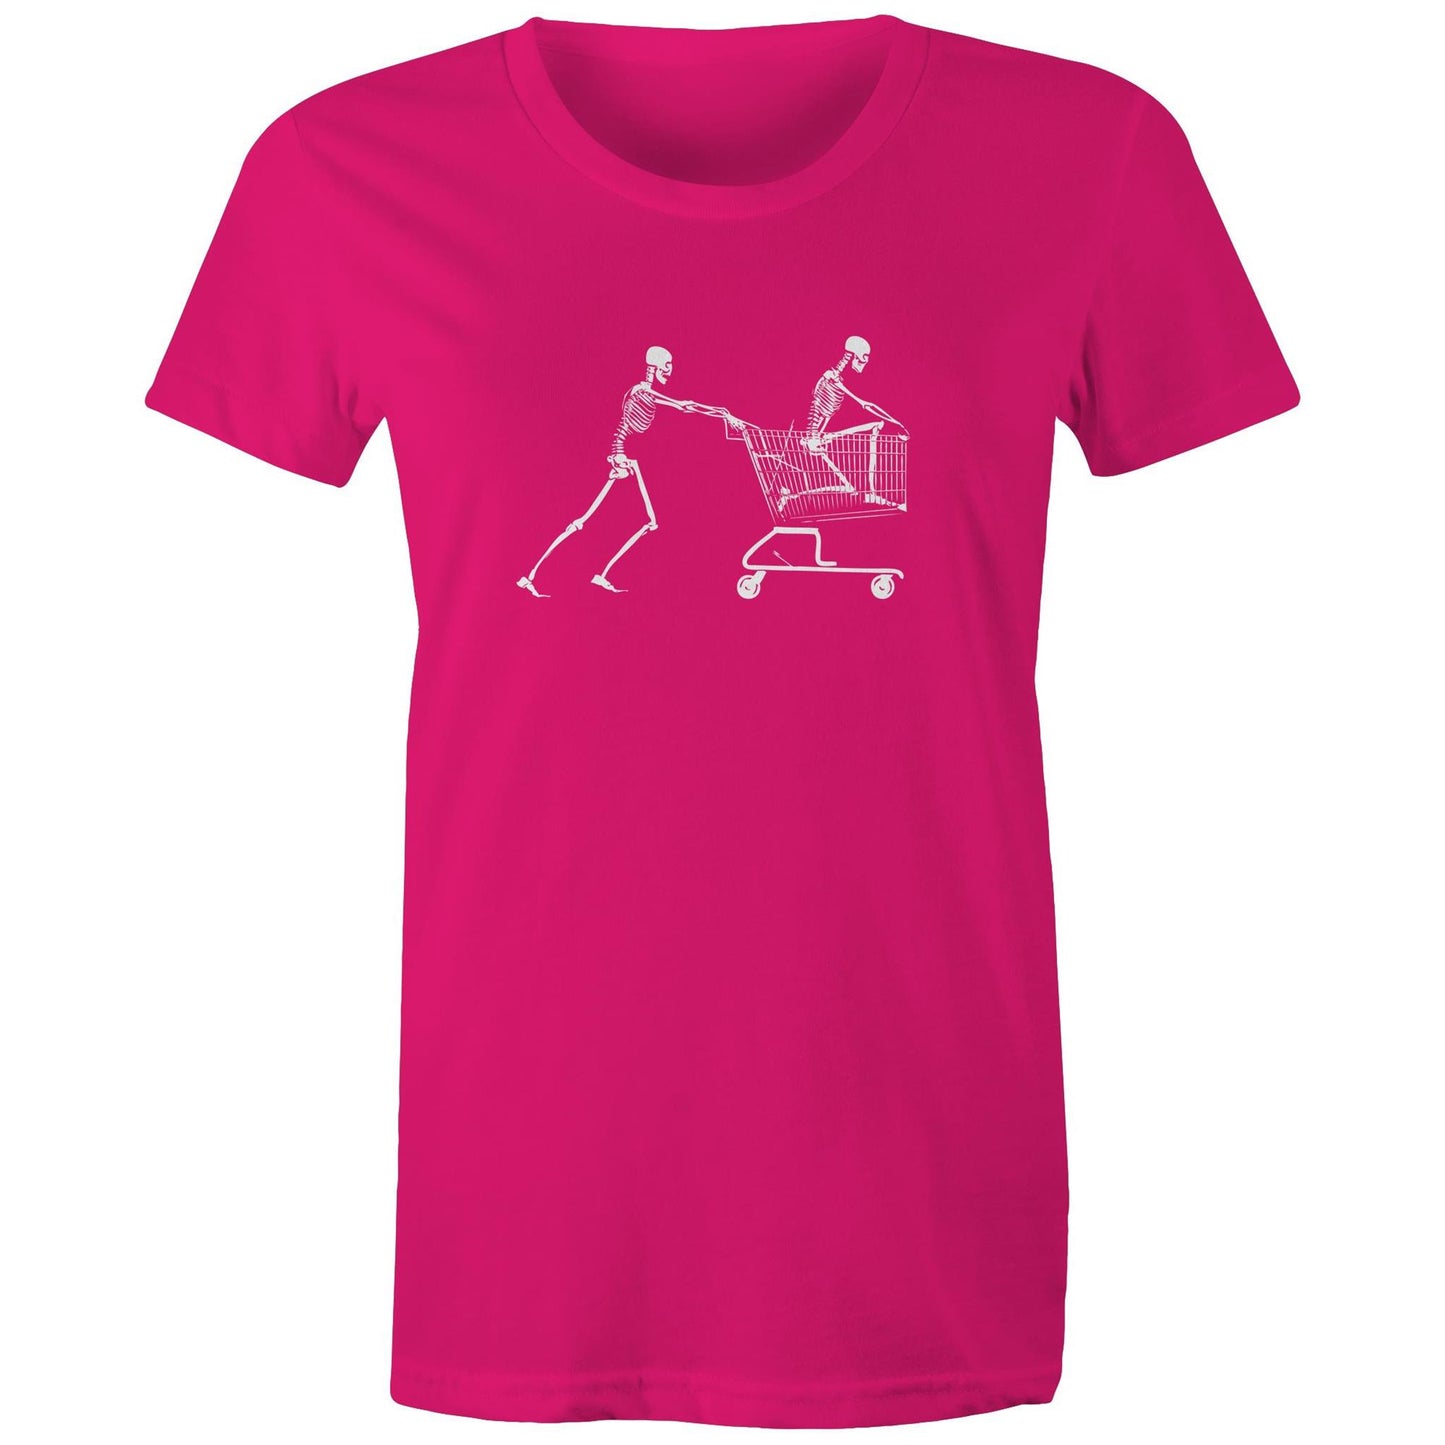 Retail Therapy - Women's T-Shirt